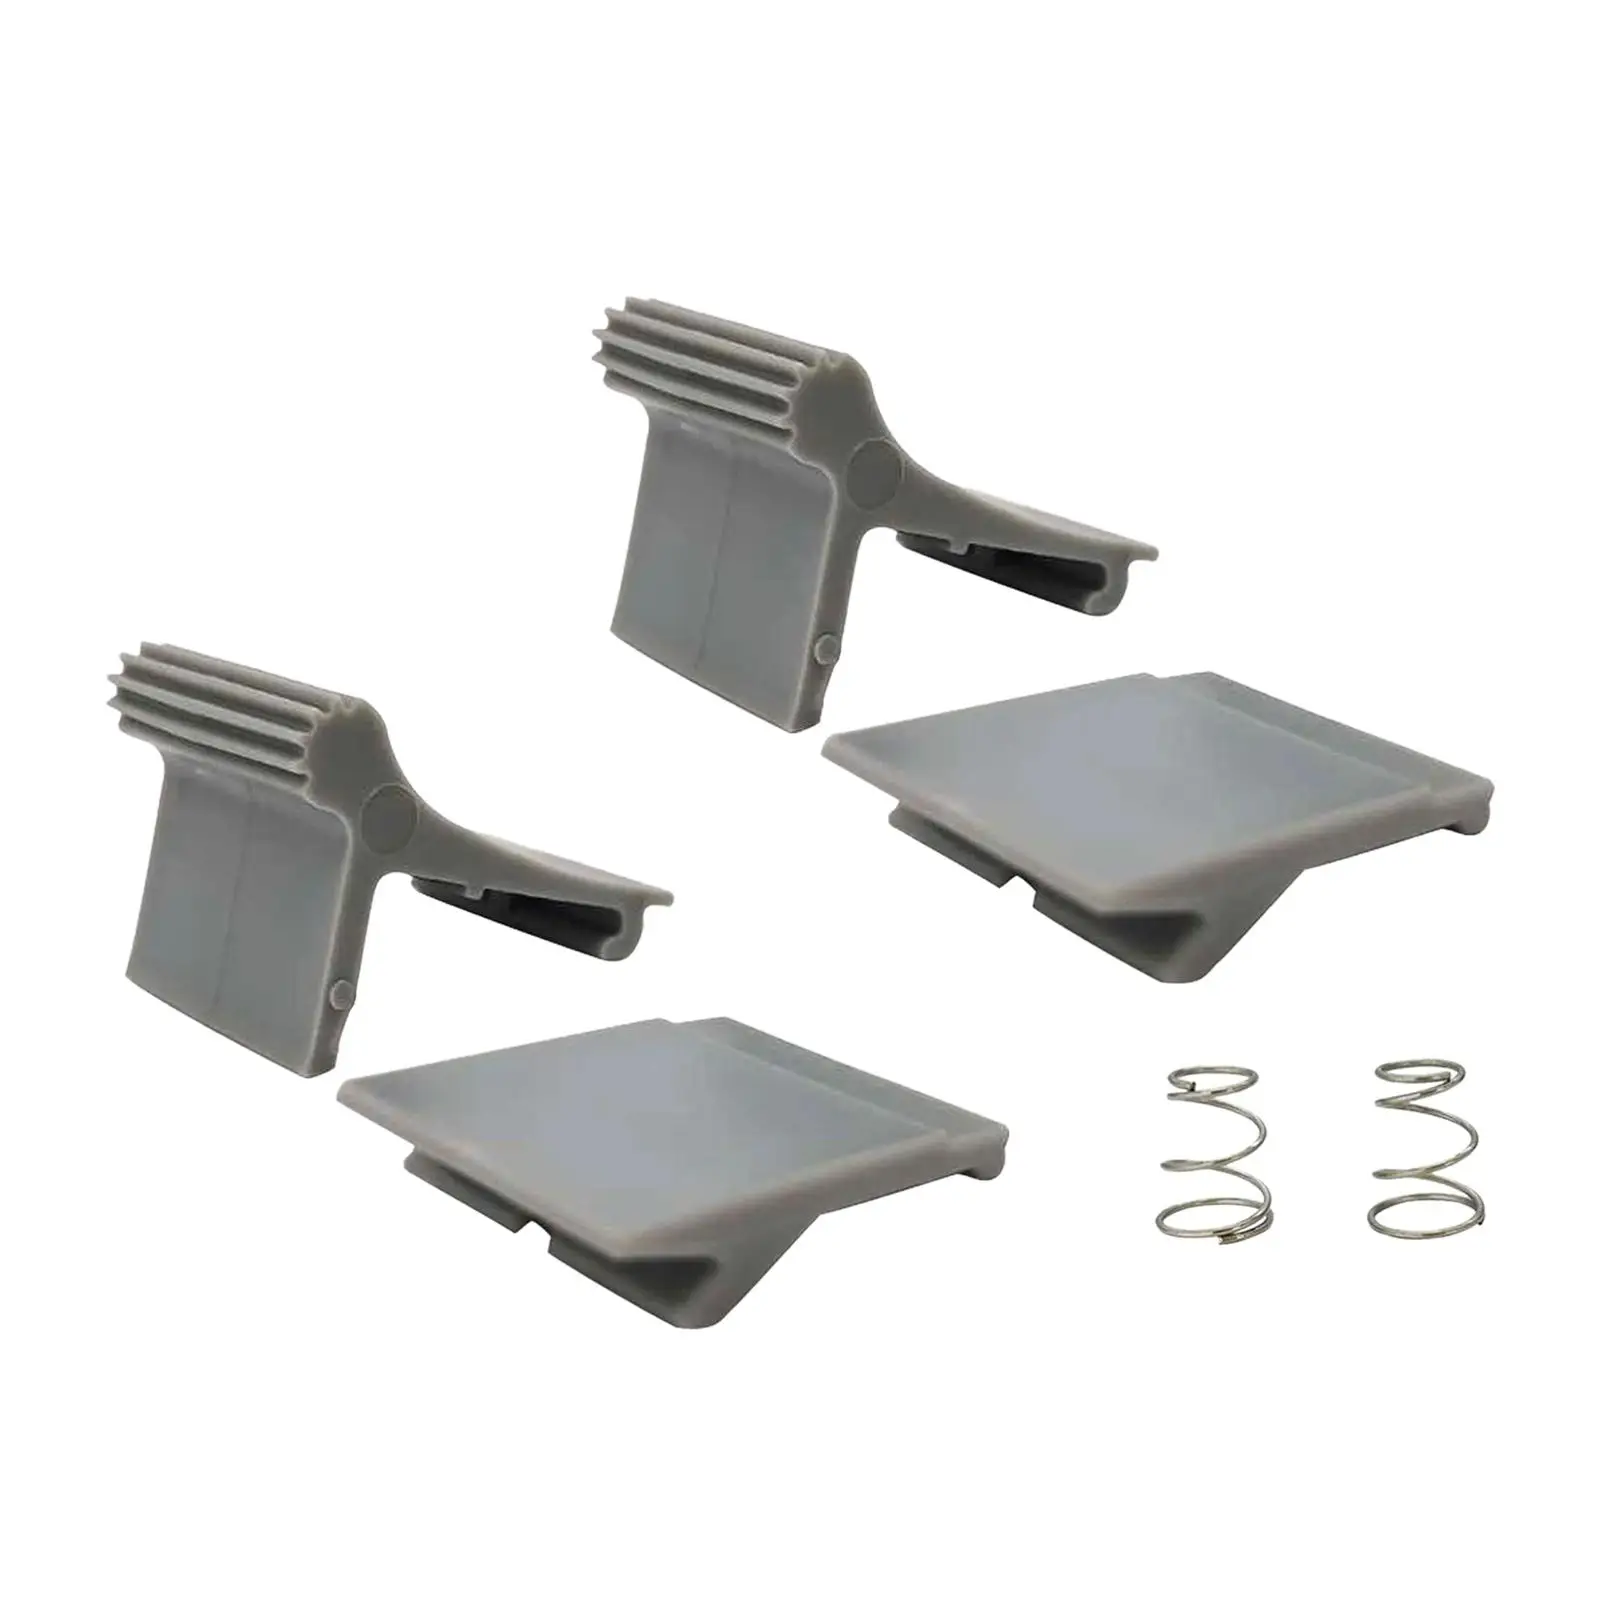 RV Awning Arm Slider Catch Set Assembly Spare Parts 4 Slider Catch with 2 Springs Replacement Accessories for Motorhome RV